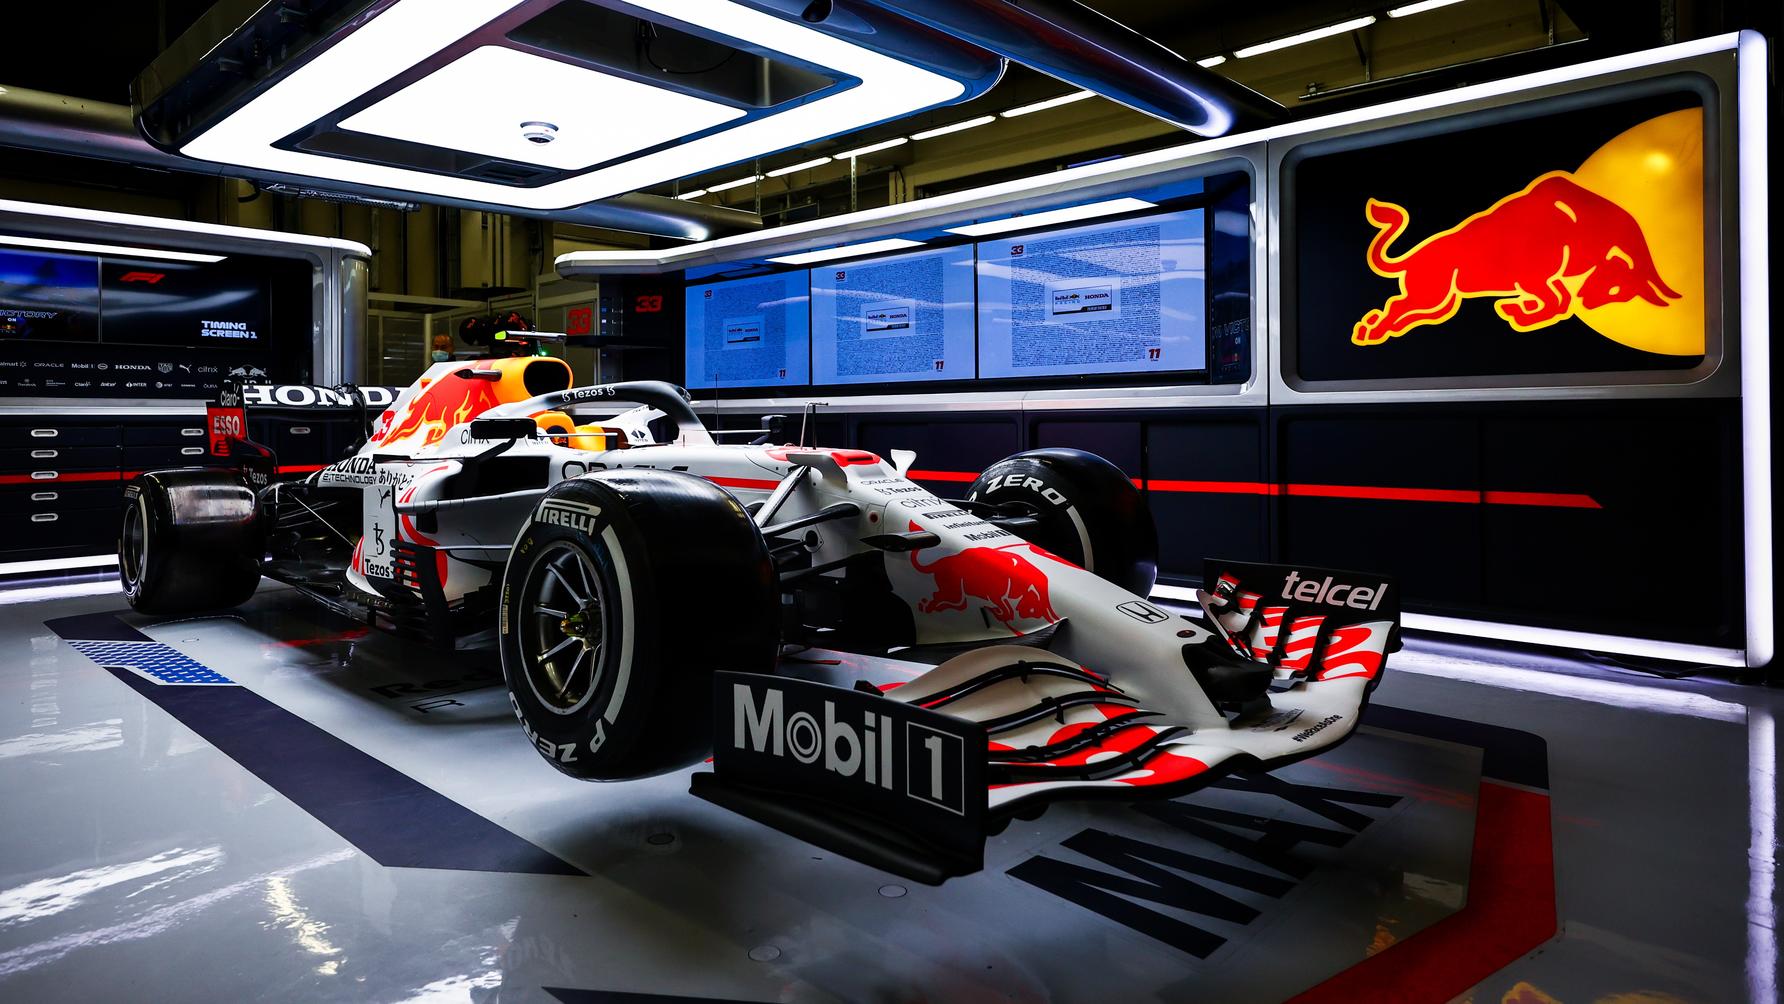 Red Bulls's Formula One Car with a one-off livery for Honda